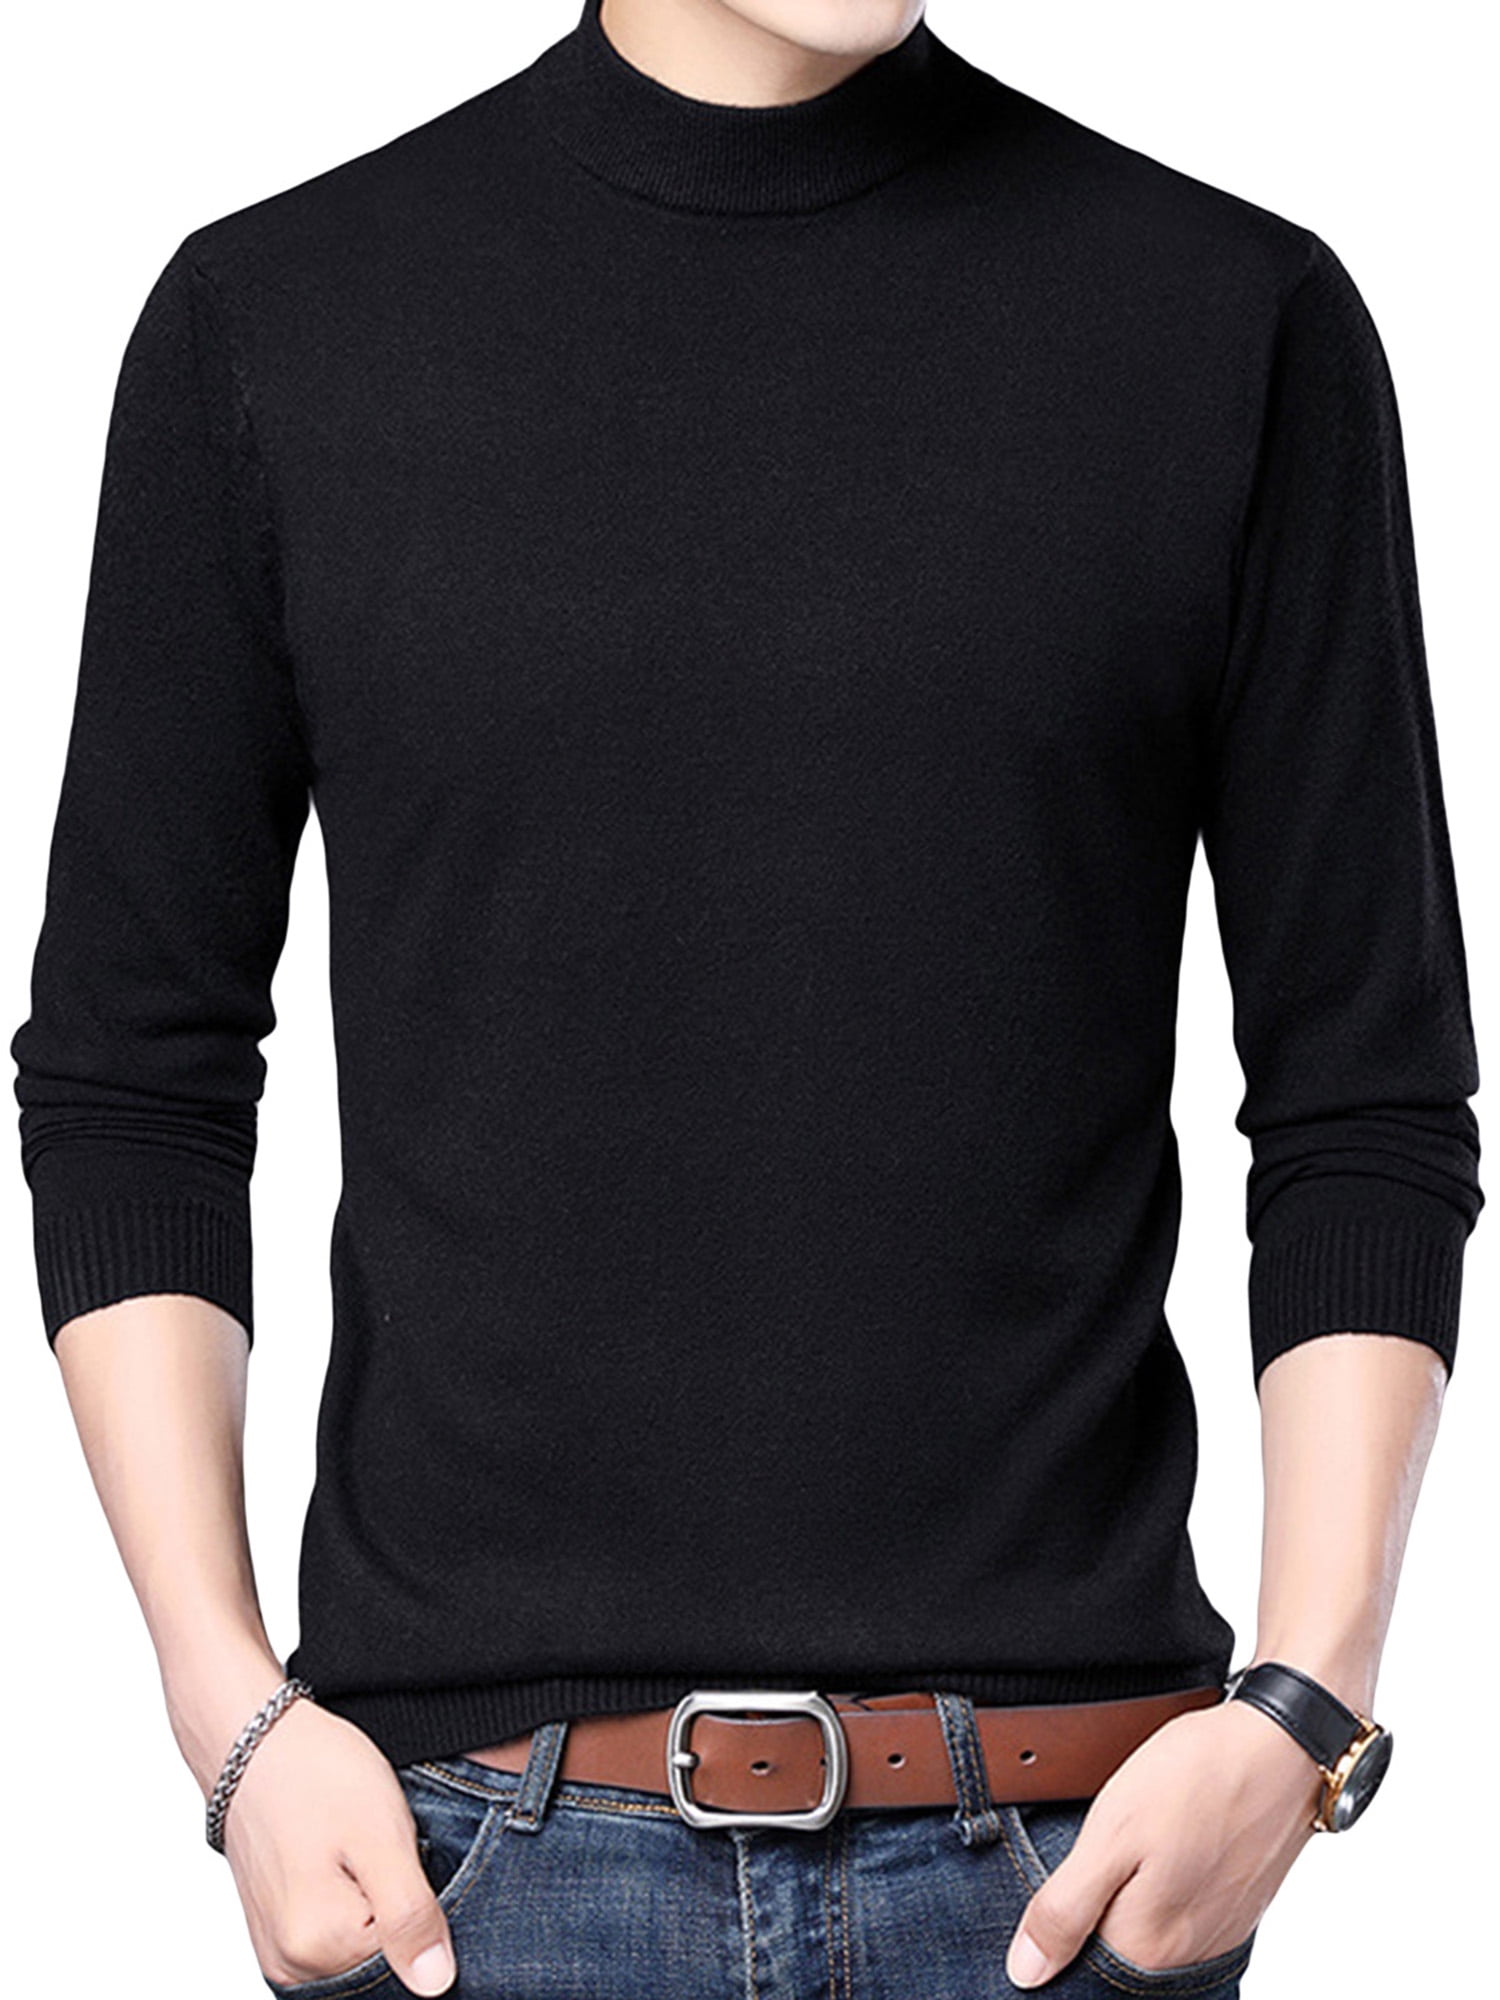 Men/'s Casual Slim Fit Long Sleeve Pullover Top Mock Neck T Shirt Men/'s Basic Tops Knitted Thermal Pullover Sweater-shirts